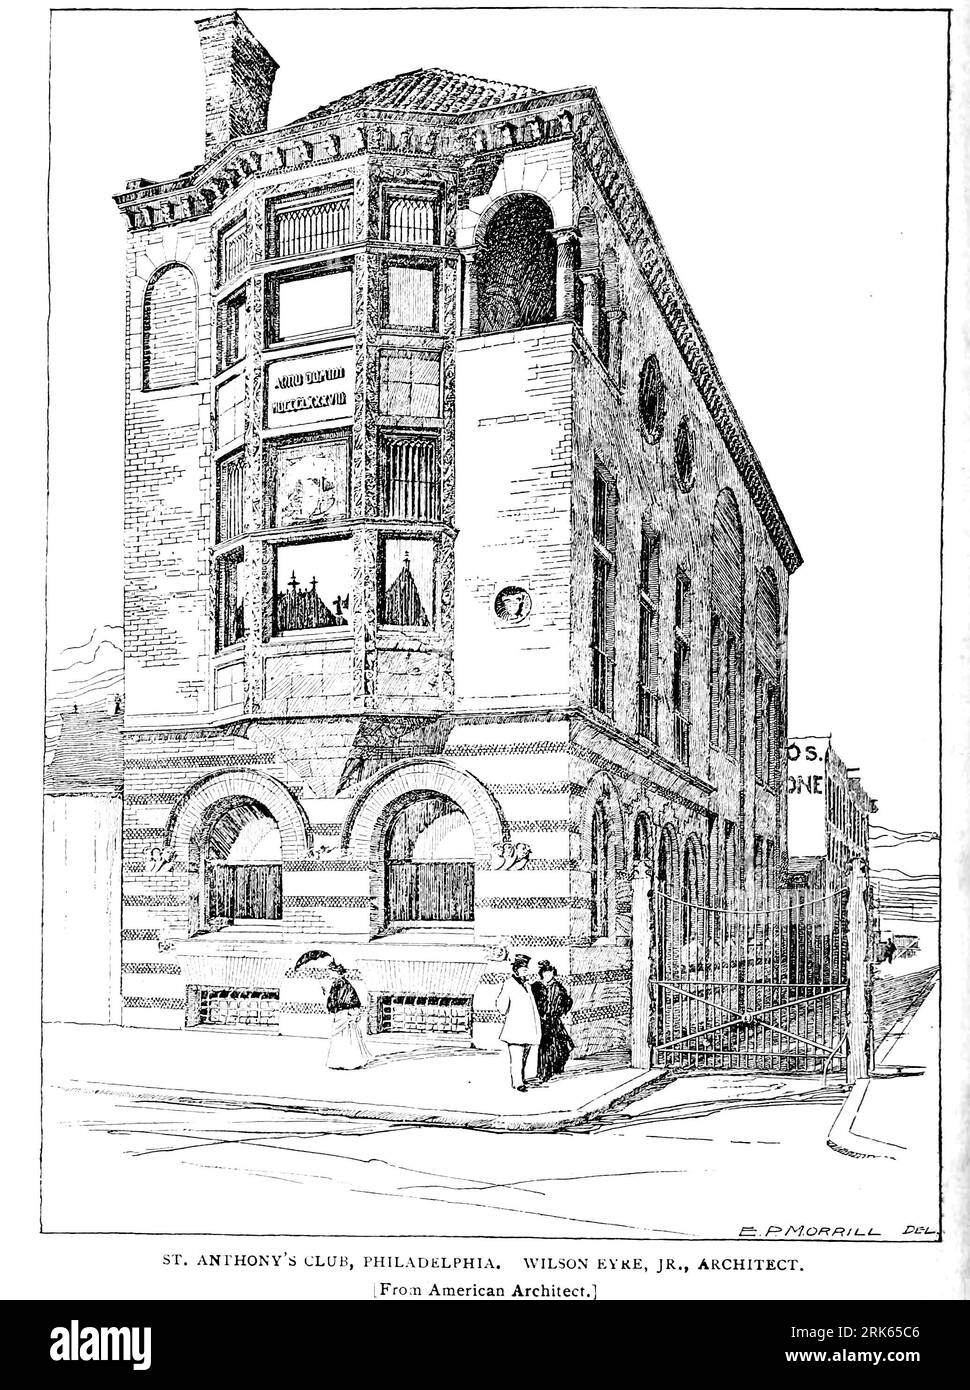 ST. ANTHONY'S CLUB, PHILADELPHIA. WILSON EVKE, JR., ARCHITECT. from the Article Architectural Review from The Engineering Magazine DEVOTED TO INDUSTRIAL PROGRESS Volume XI October 1896 NEW YORK The Engineering Magazine Co Stock Photo